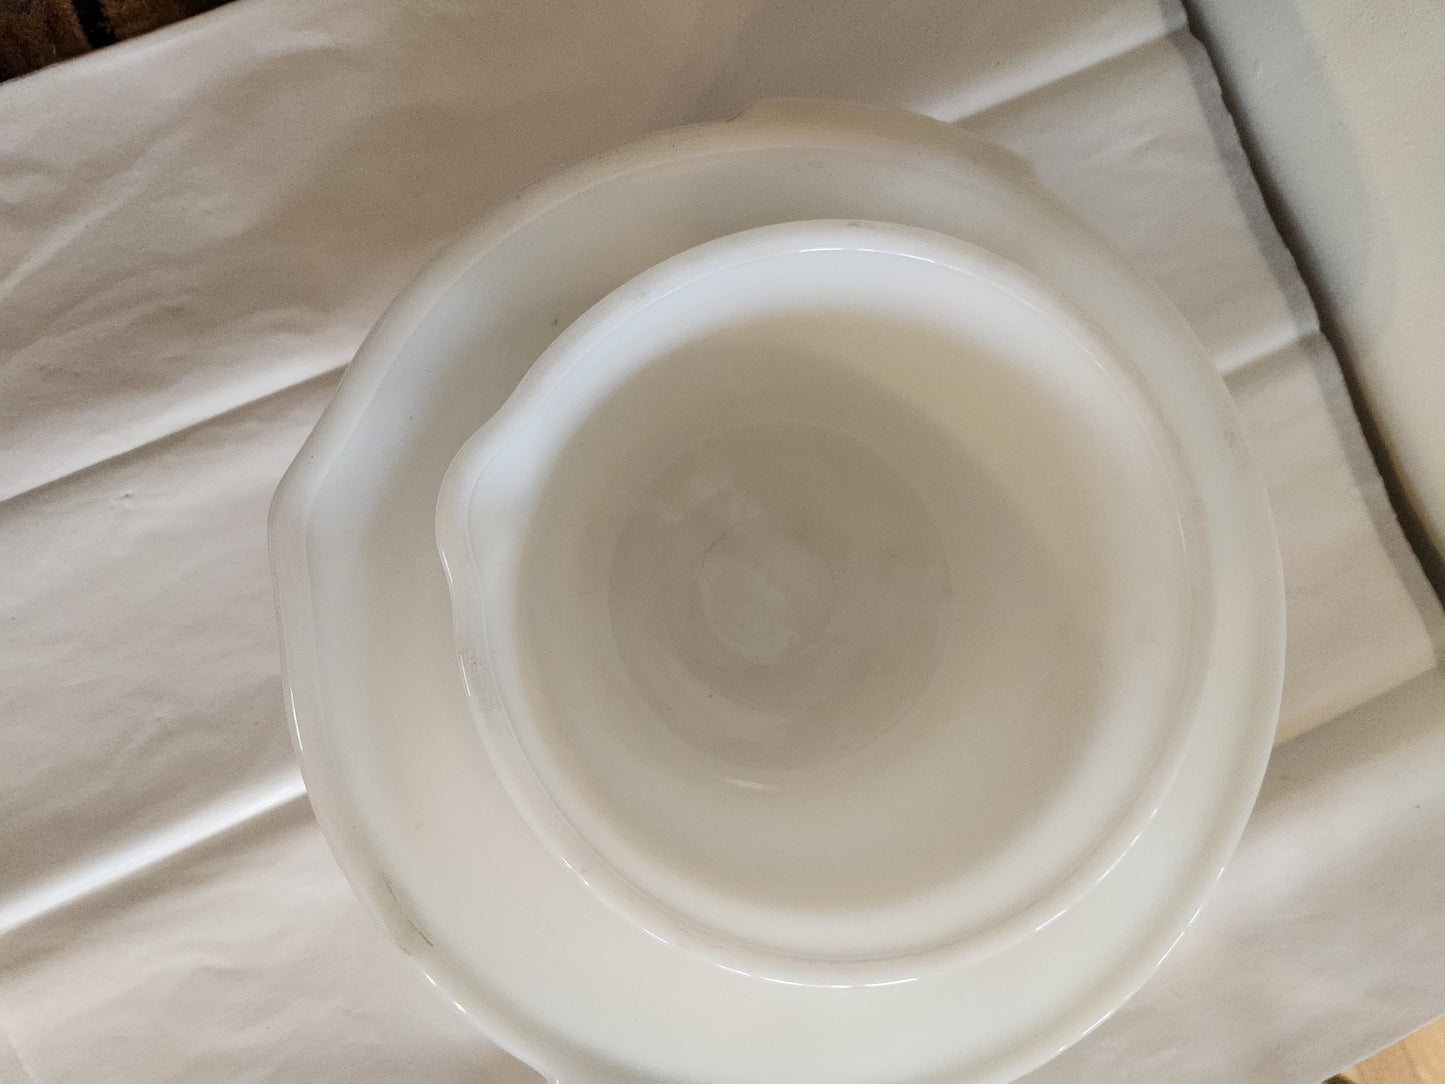 Clasbake for Sunbeam Mixing Bowls (2)